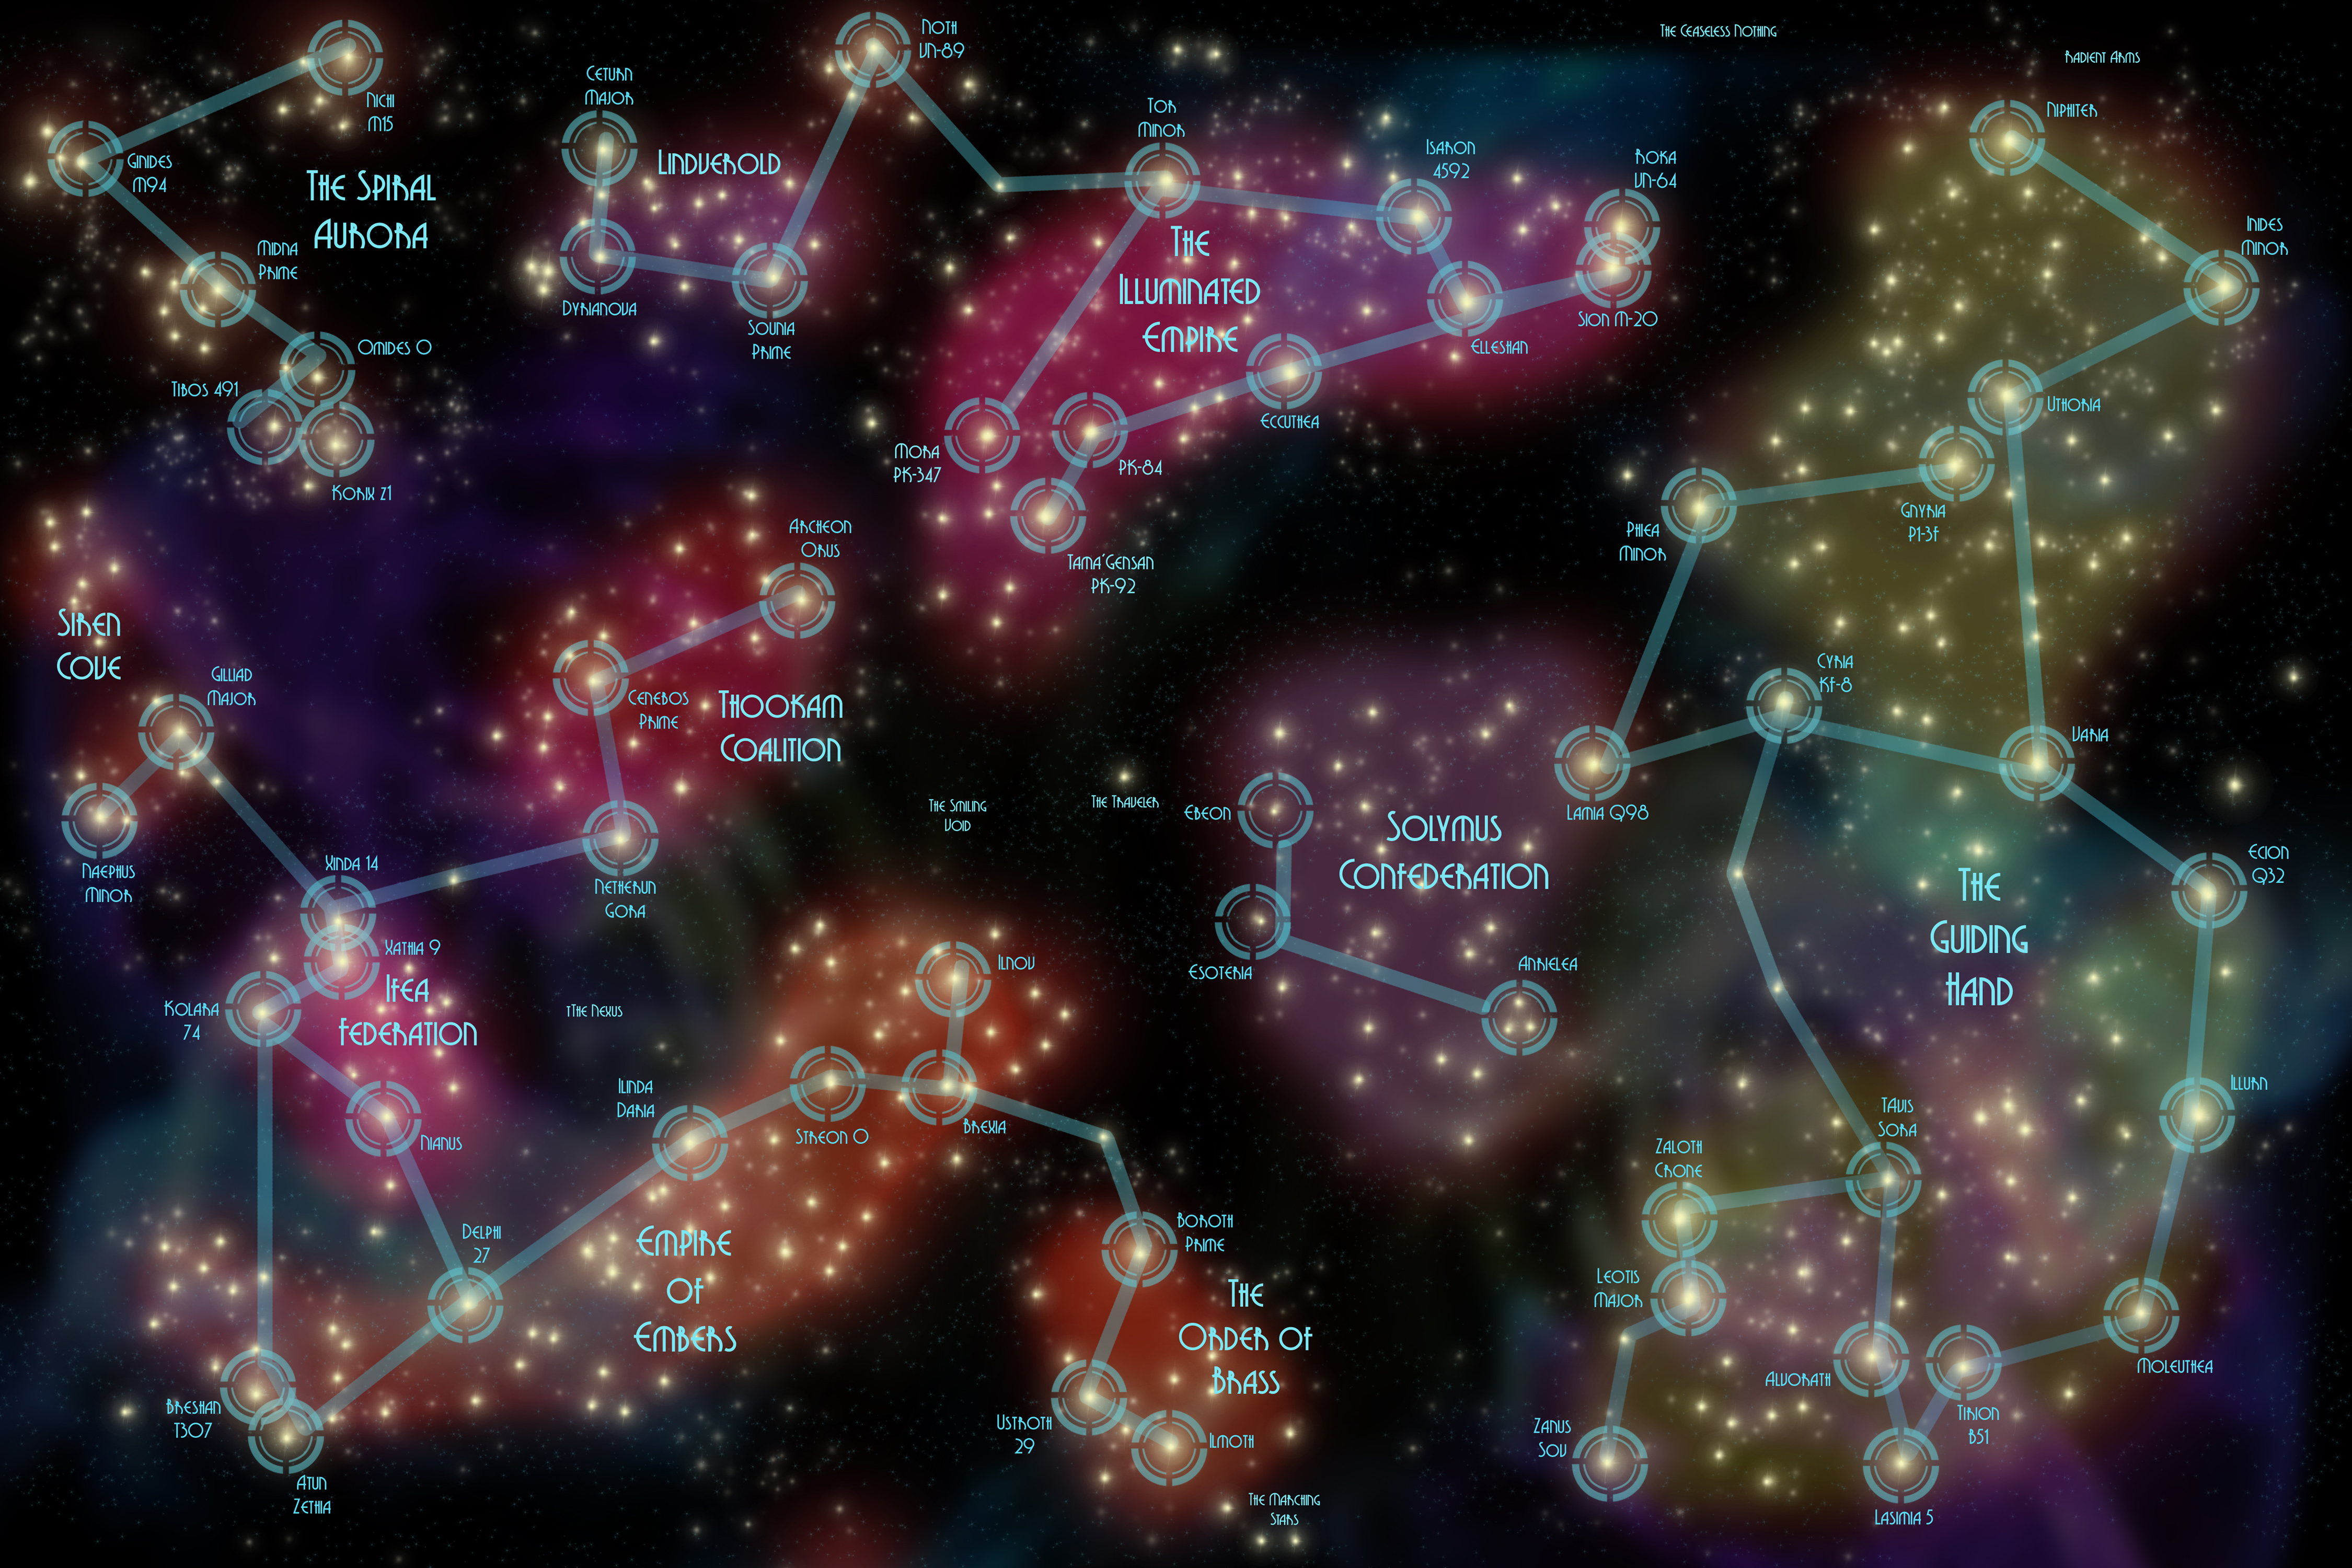 Galaxy Map with Photoshop